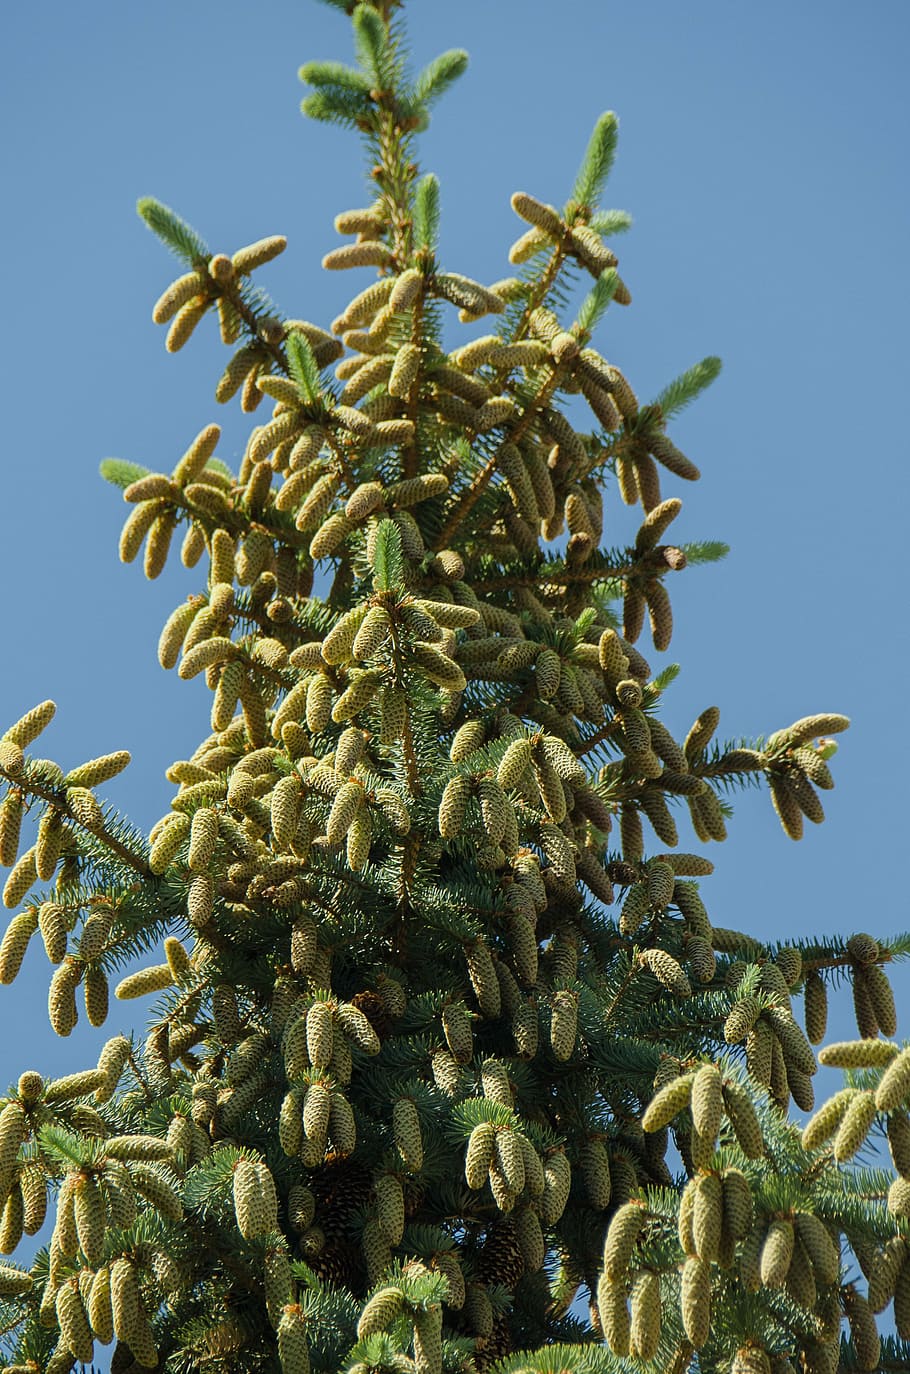 spruce, tree, conifer, cones, needles, branch, outdoors, trunk, plant, sky